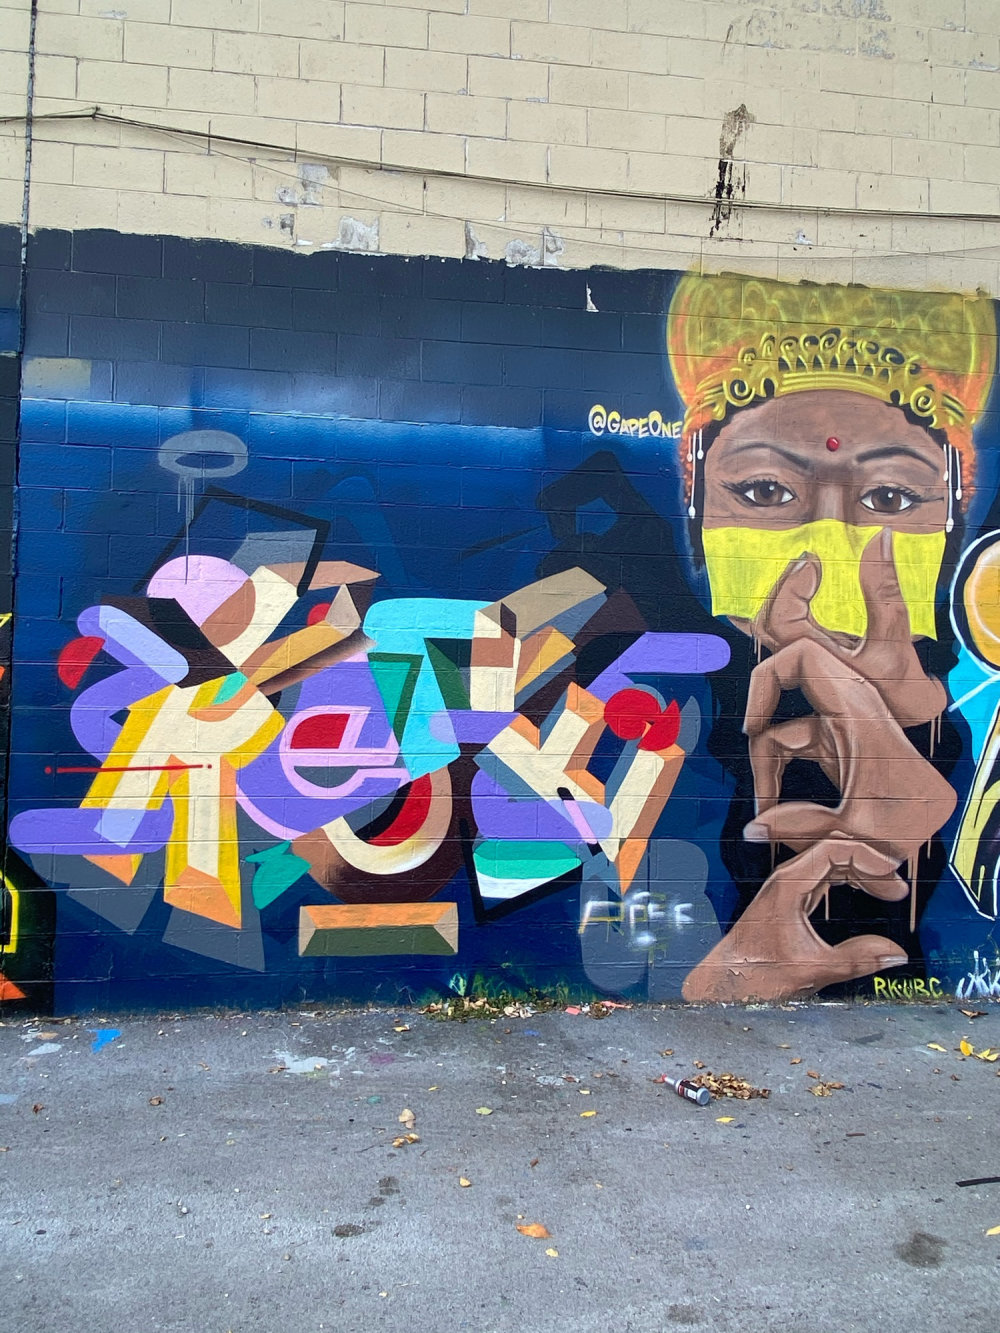 mural in Chicago by artist Gape One.